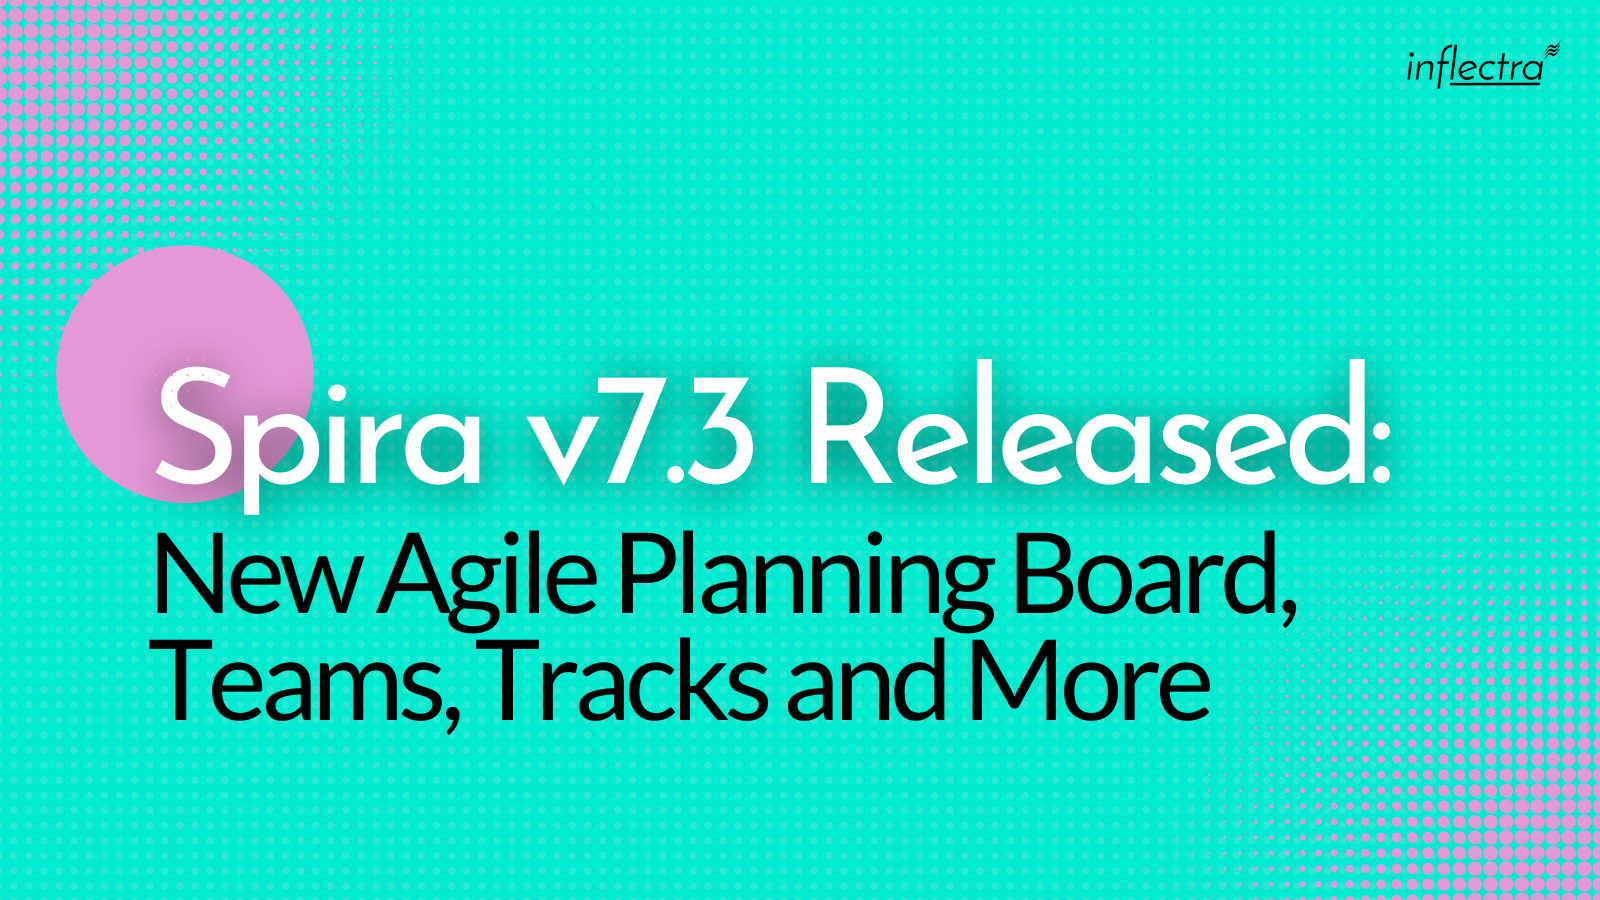 rpira-version-seven-point-three-released-new-agile-planning-board-teams-tracks-and-more-inflectra-image